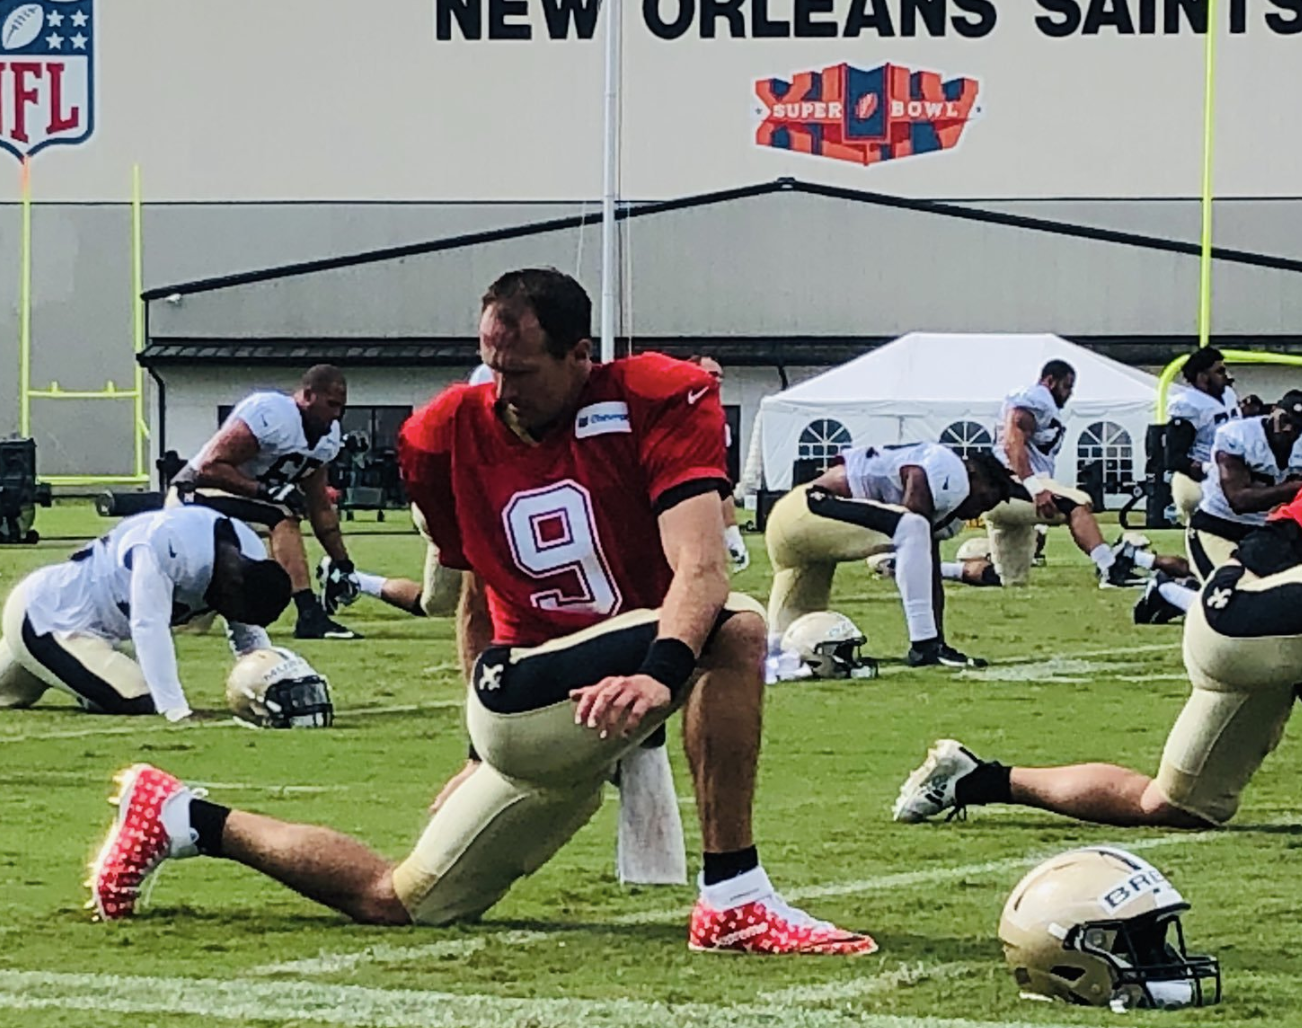 Twitter Reacts to Drew Brees Wearing Custom Supreme x Louis